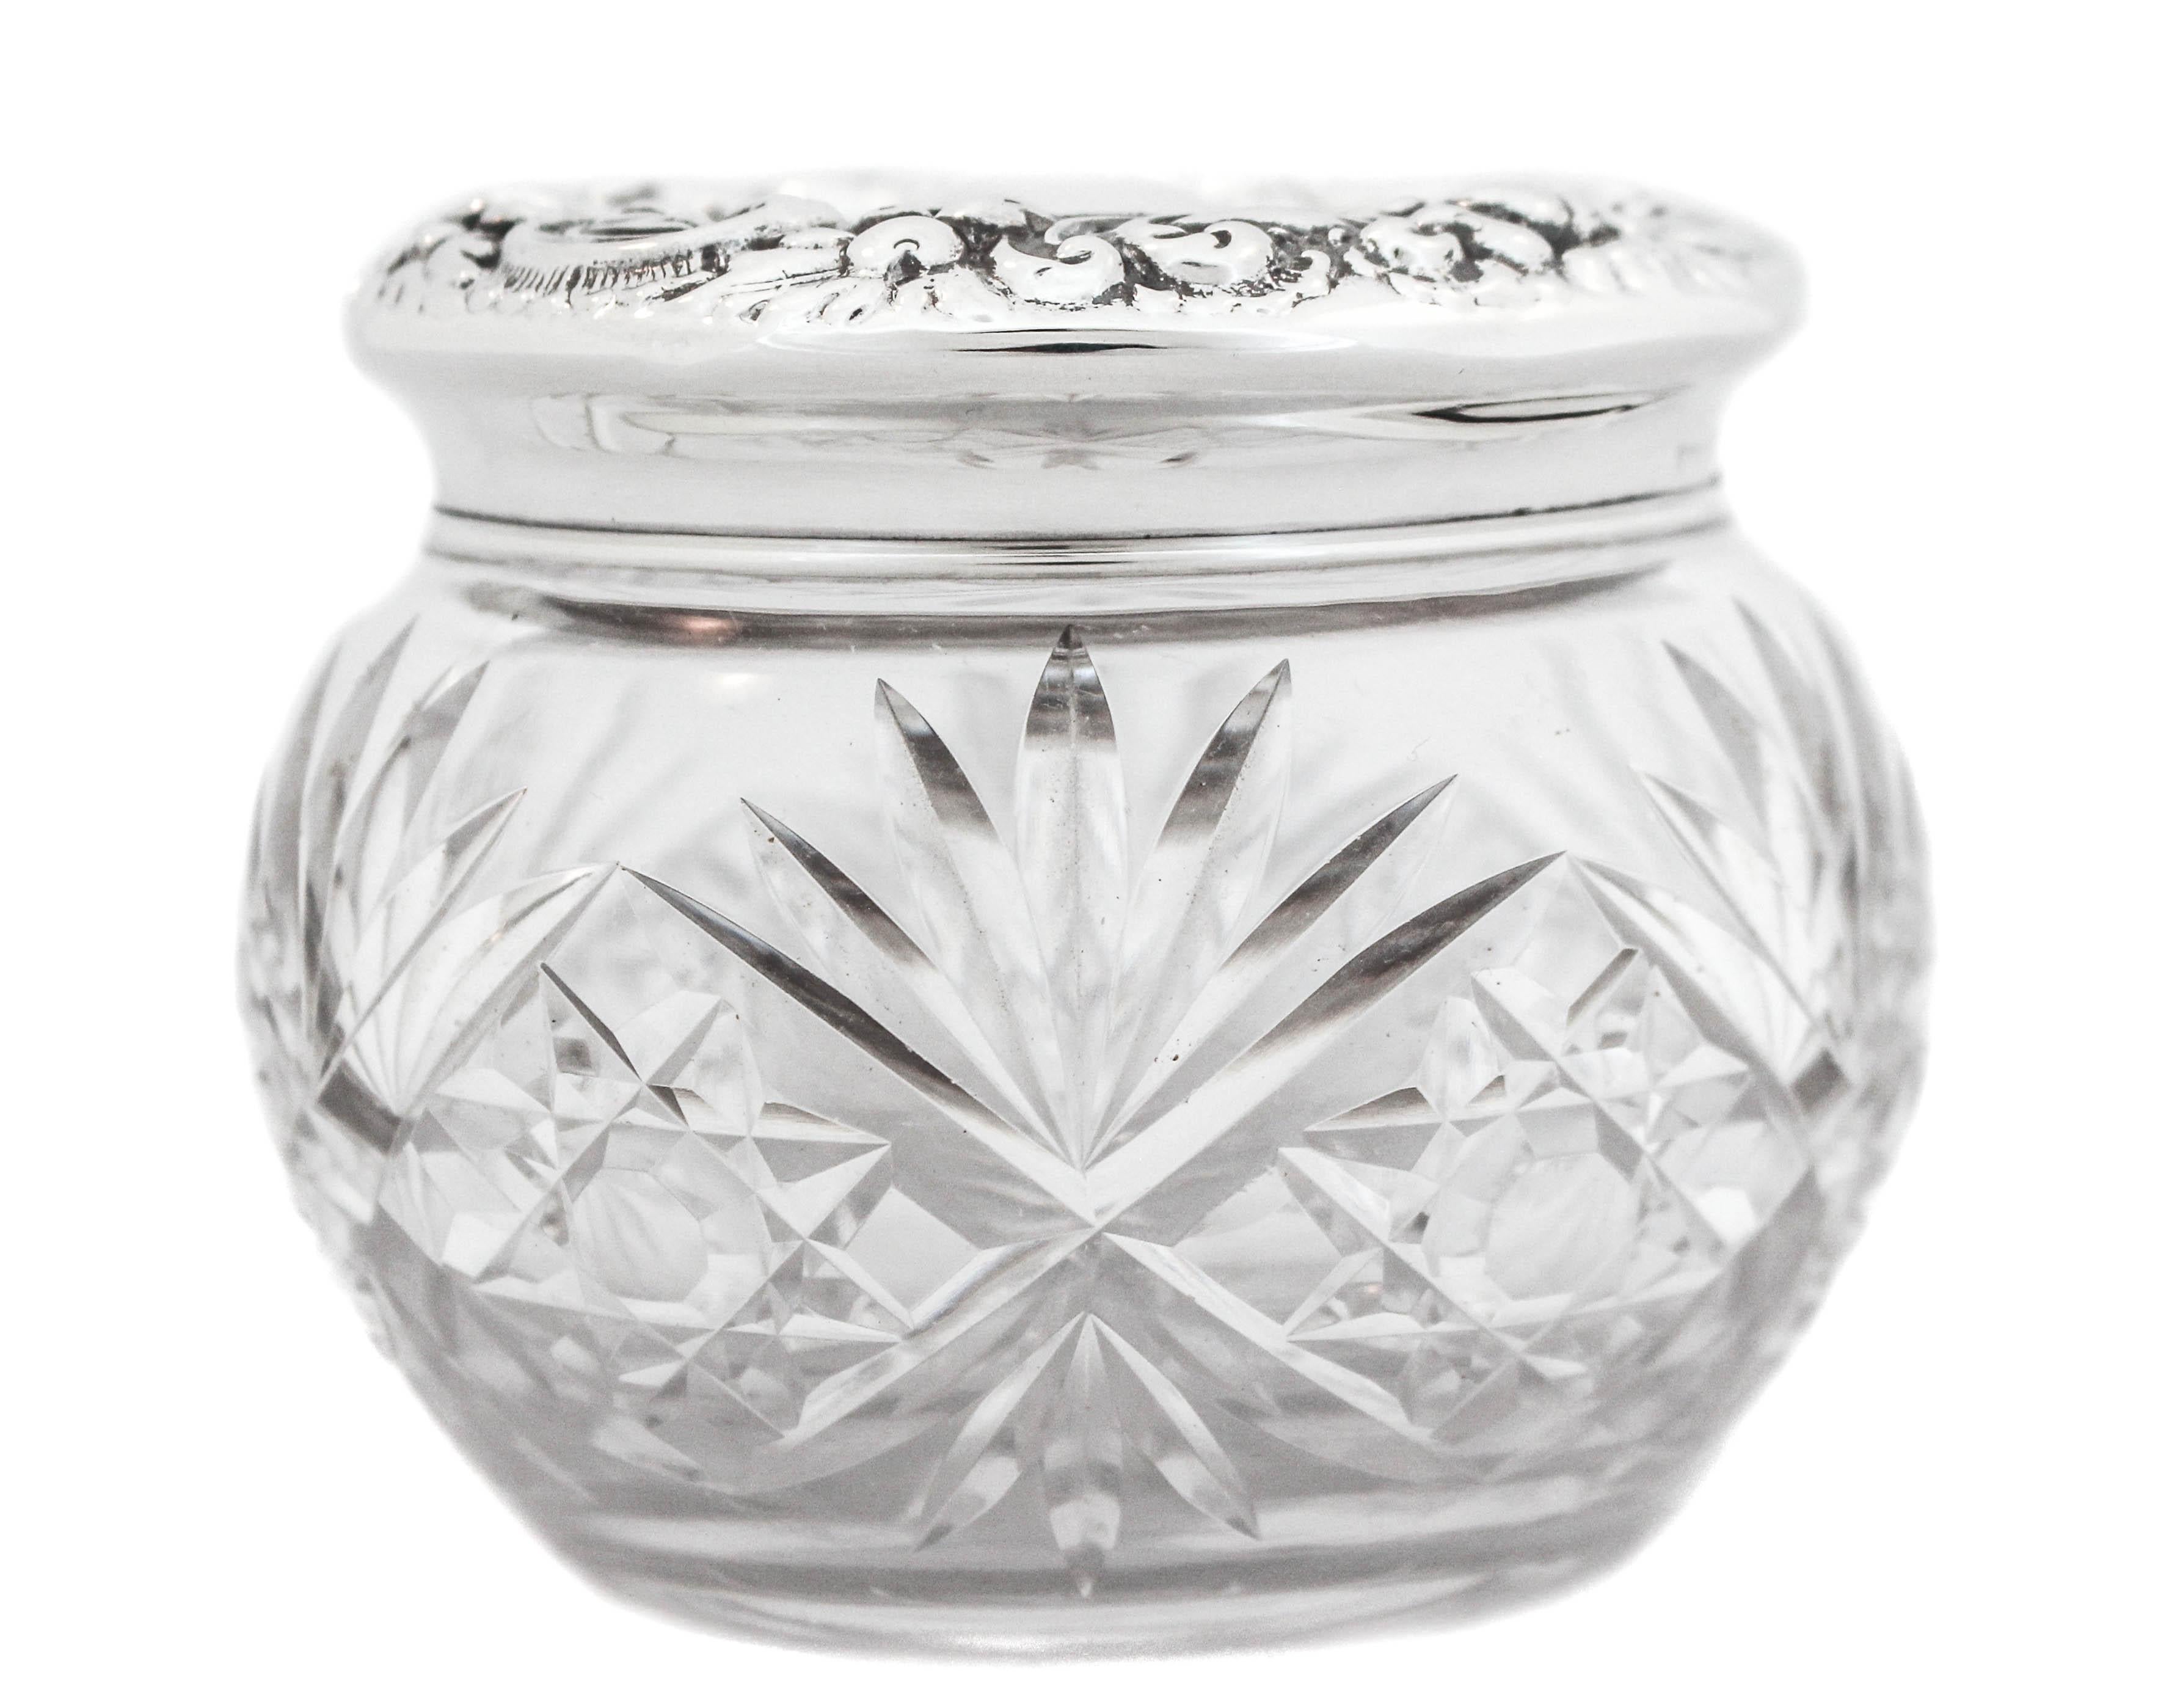 A beautiful sterling silver Repousse lid on a cut-glass jar.  The cover has beautiful blown out flowers and swirls along the edge while in the center there’s a space for a monogram.  The jar has cut glass all around and a starburst on the bottom. 